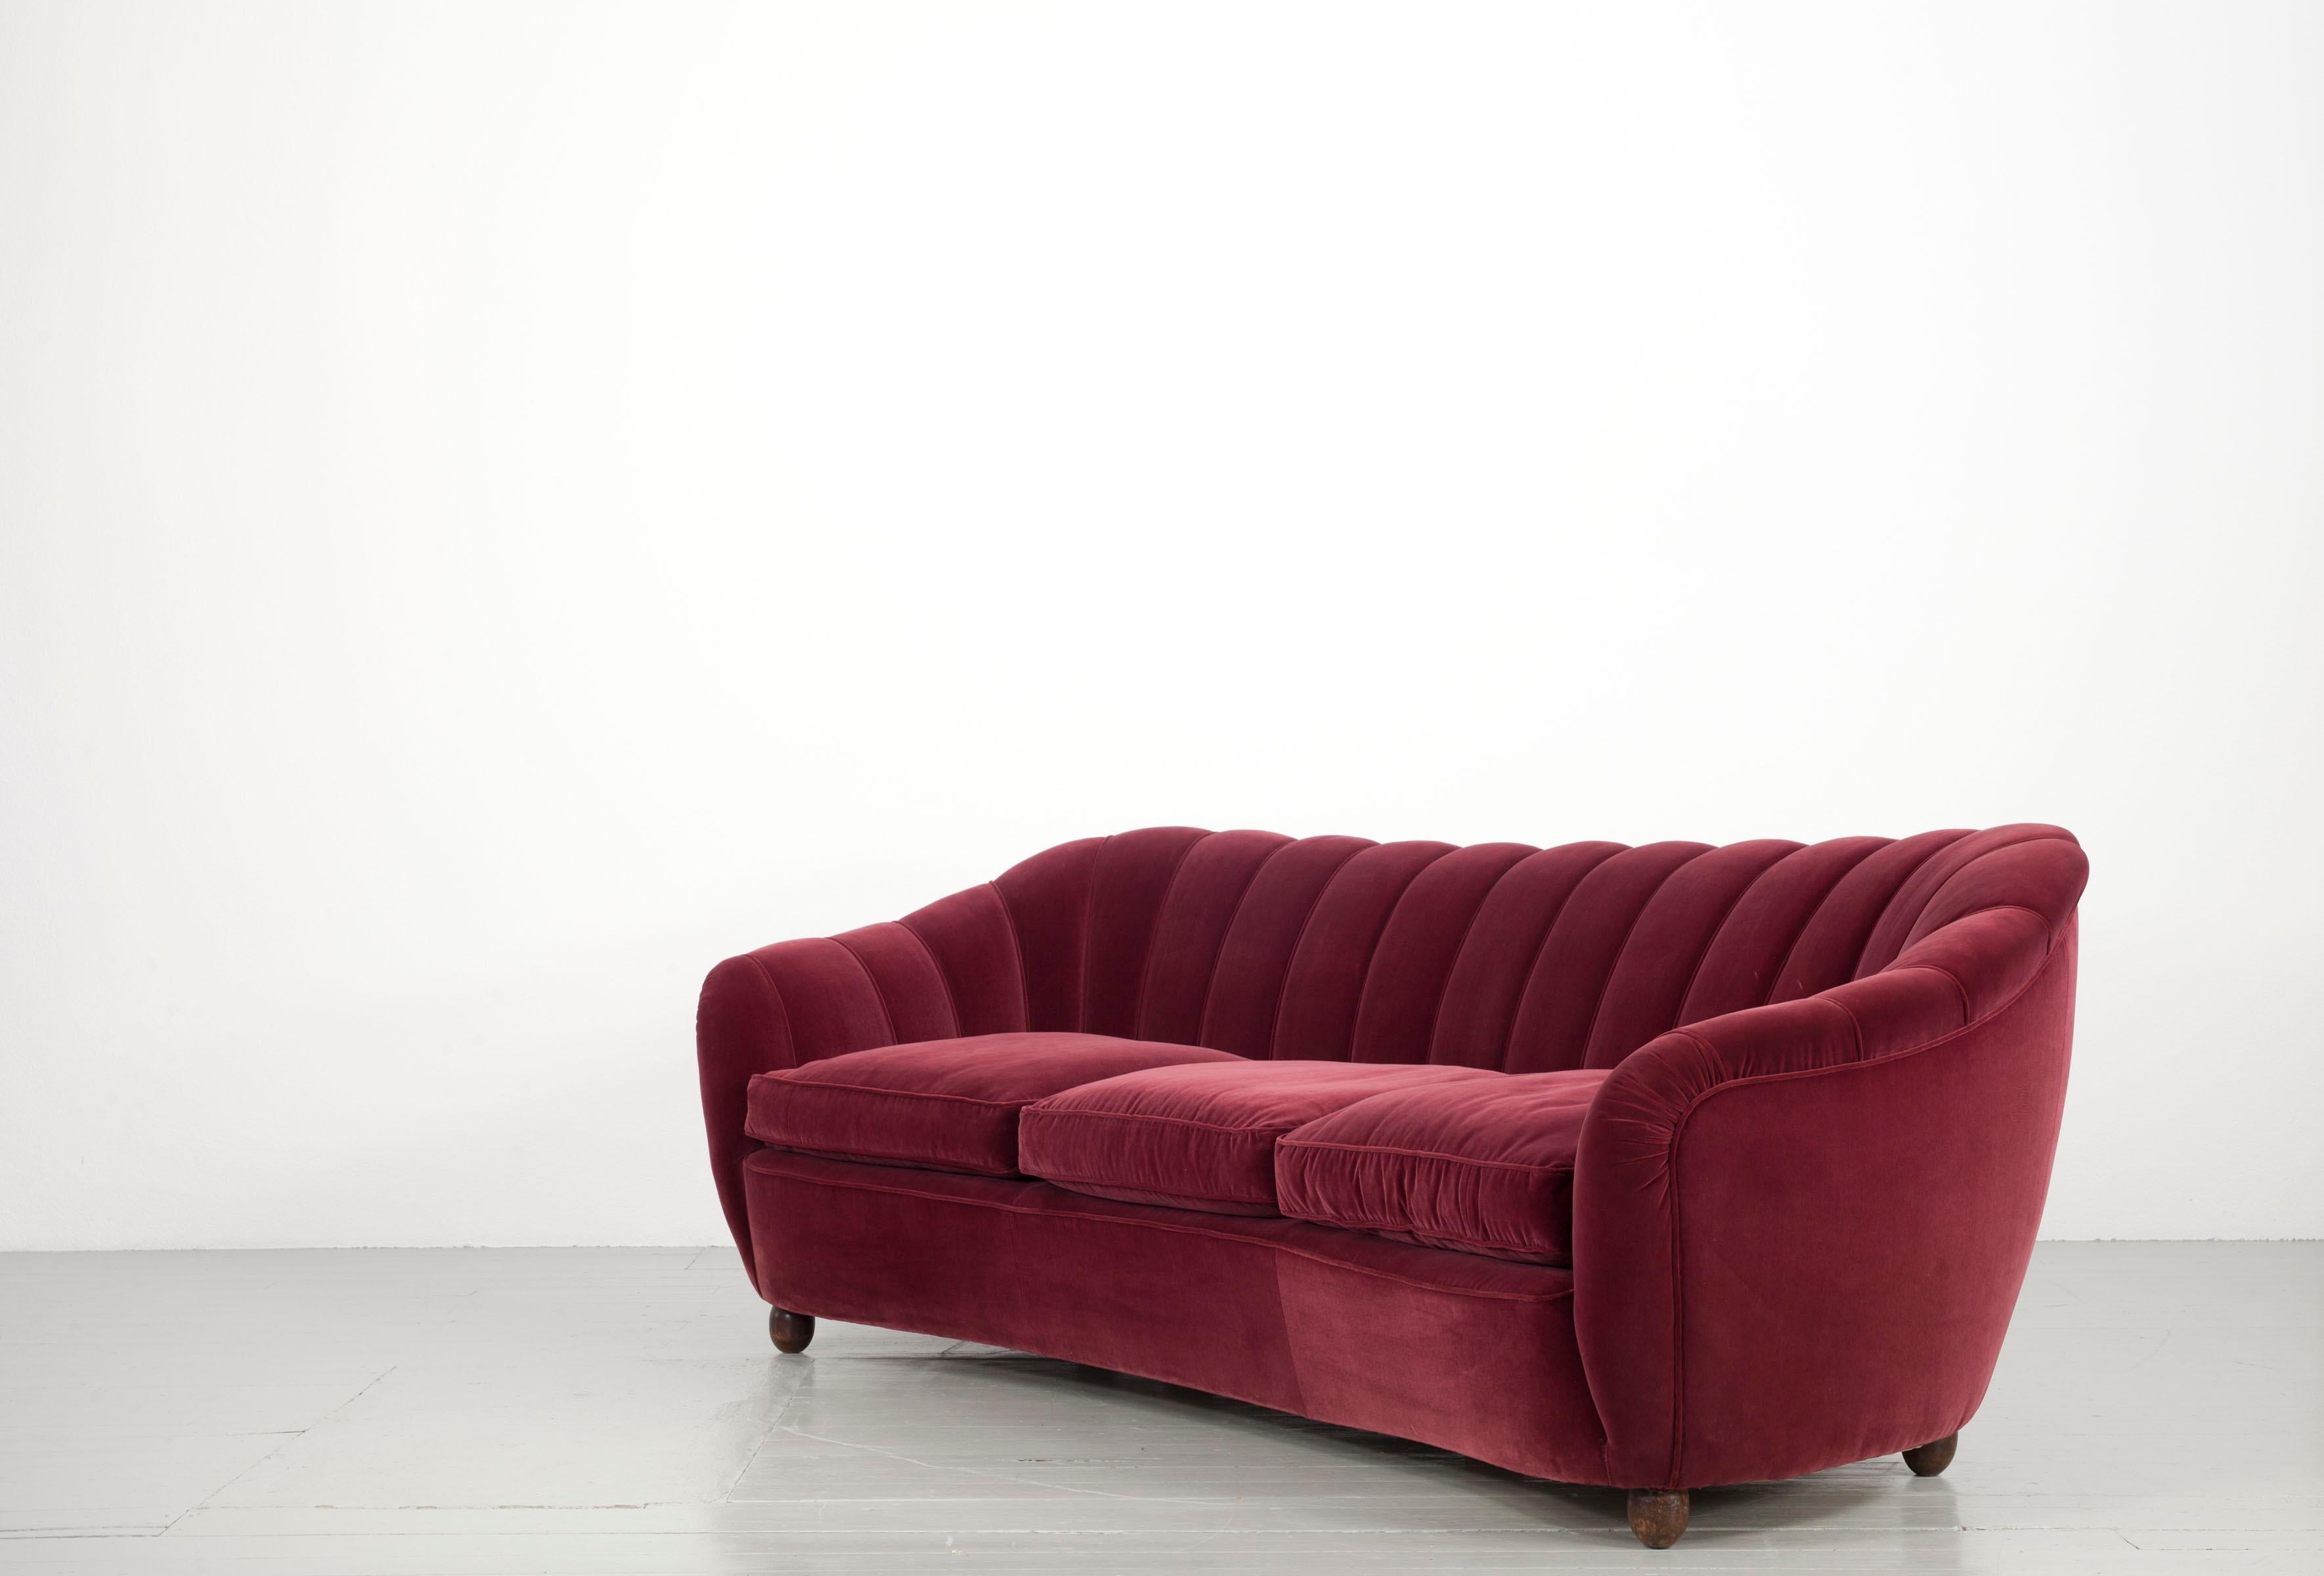 Italian Set of a Massive Sofa and Two Armchairs in Dark Red Velvet Cover, 1940s For Sale 11